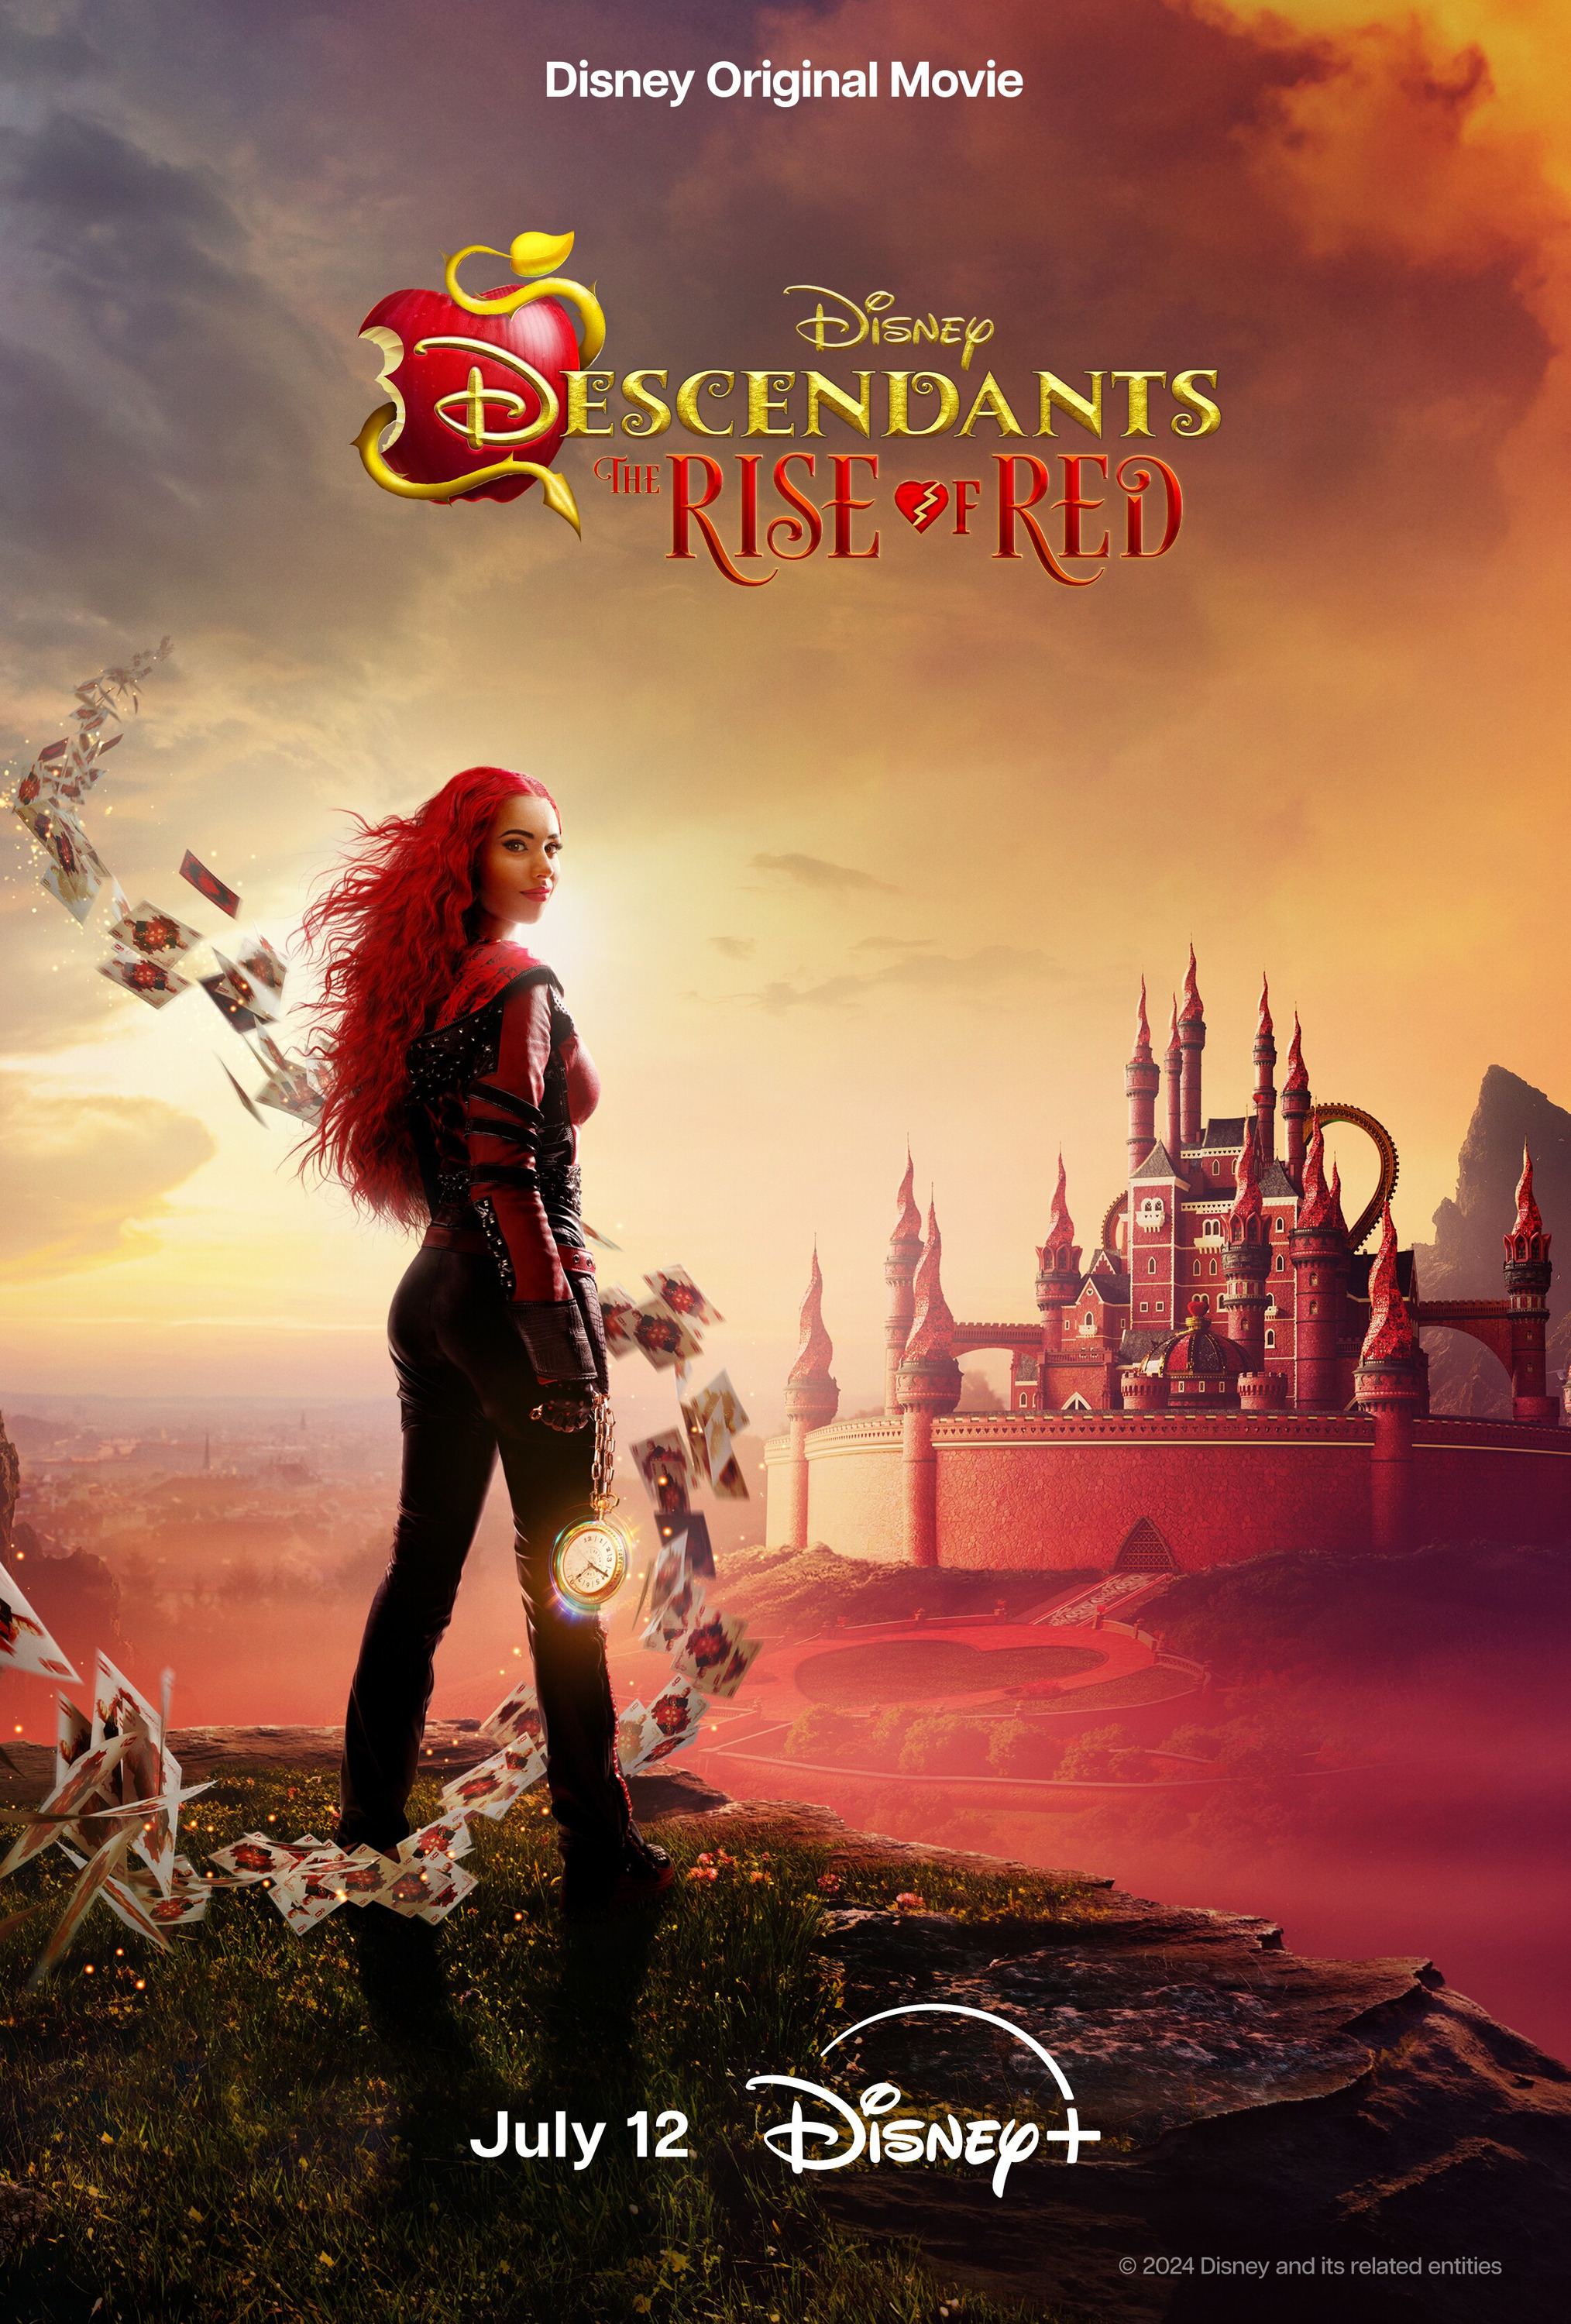 Mega Sized Movie Poster Image for Descendants: The Rise of Red (#1 of 13)